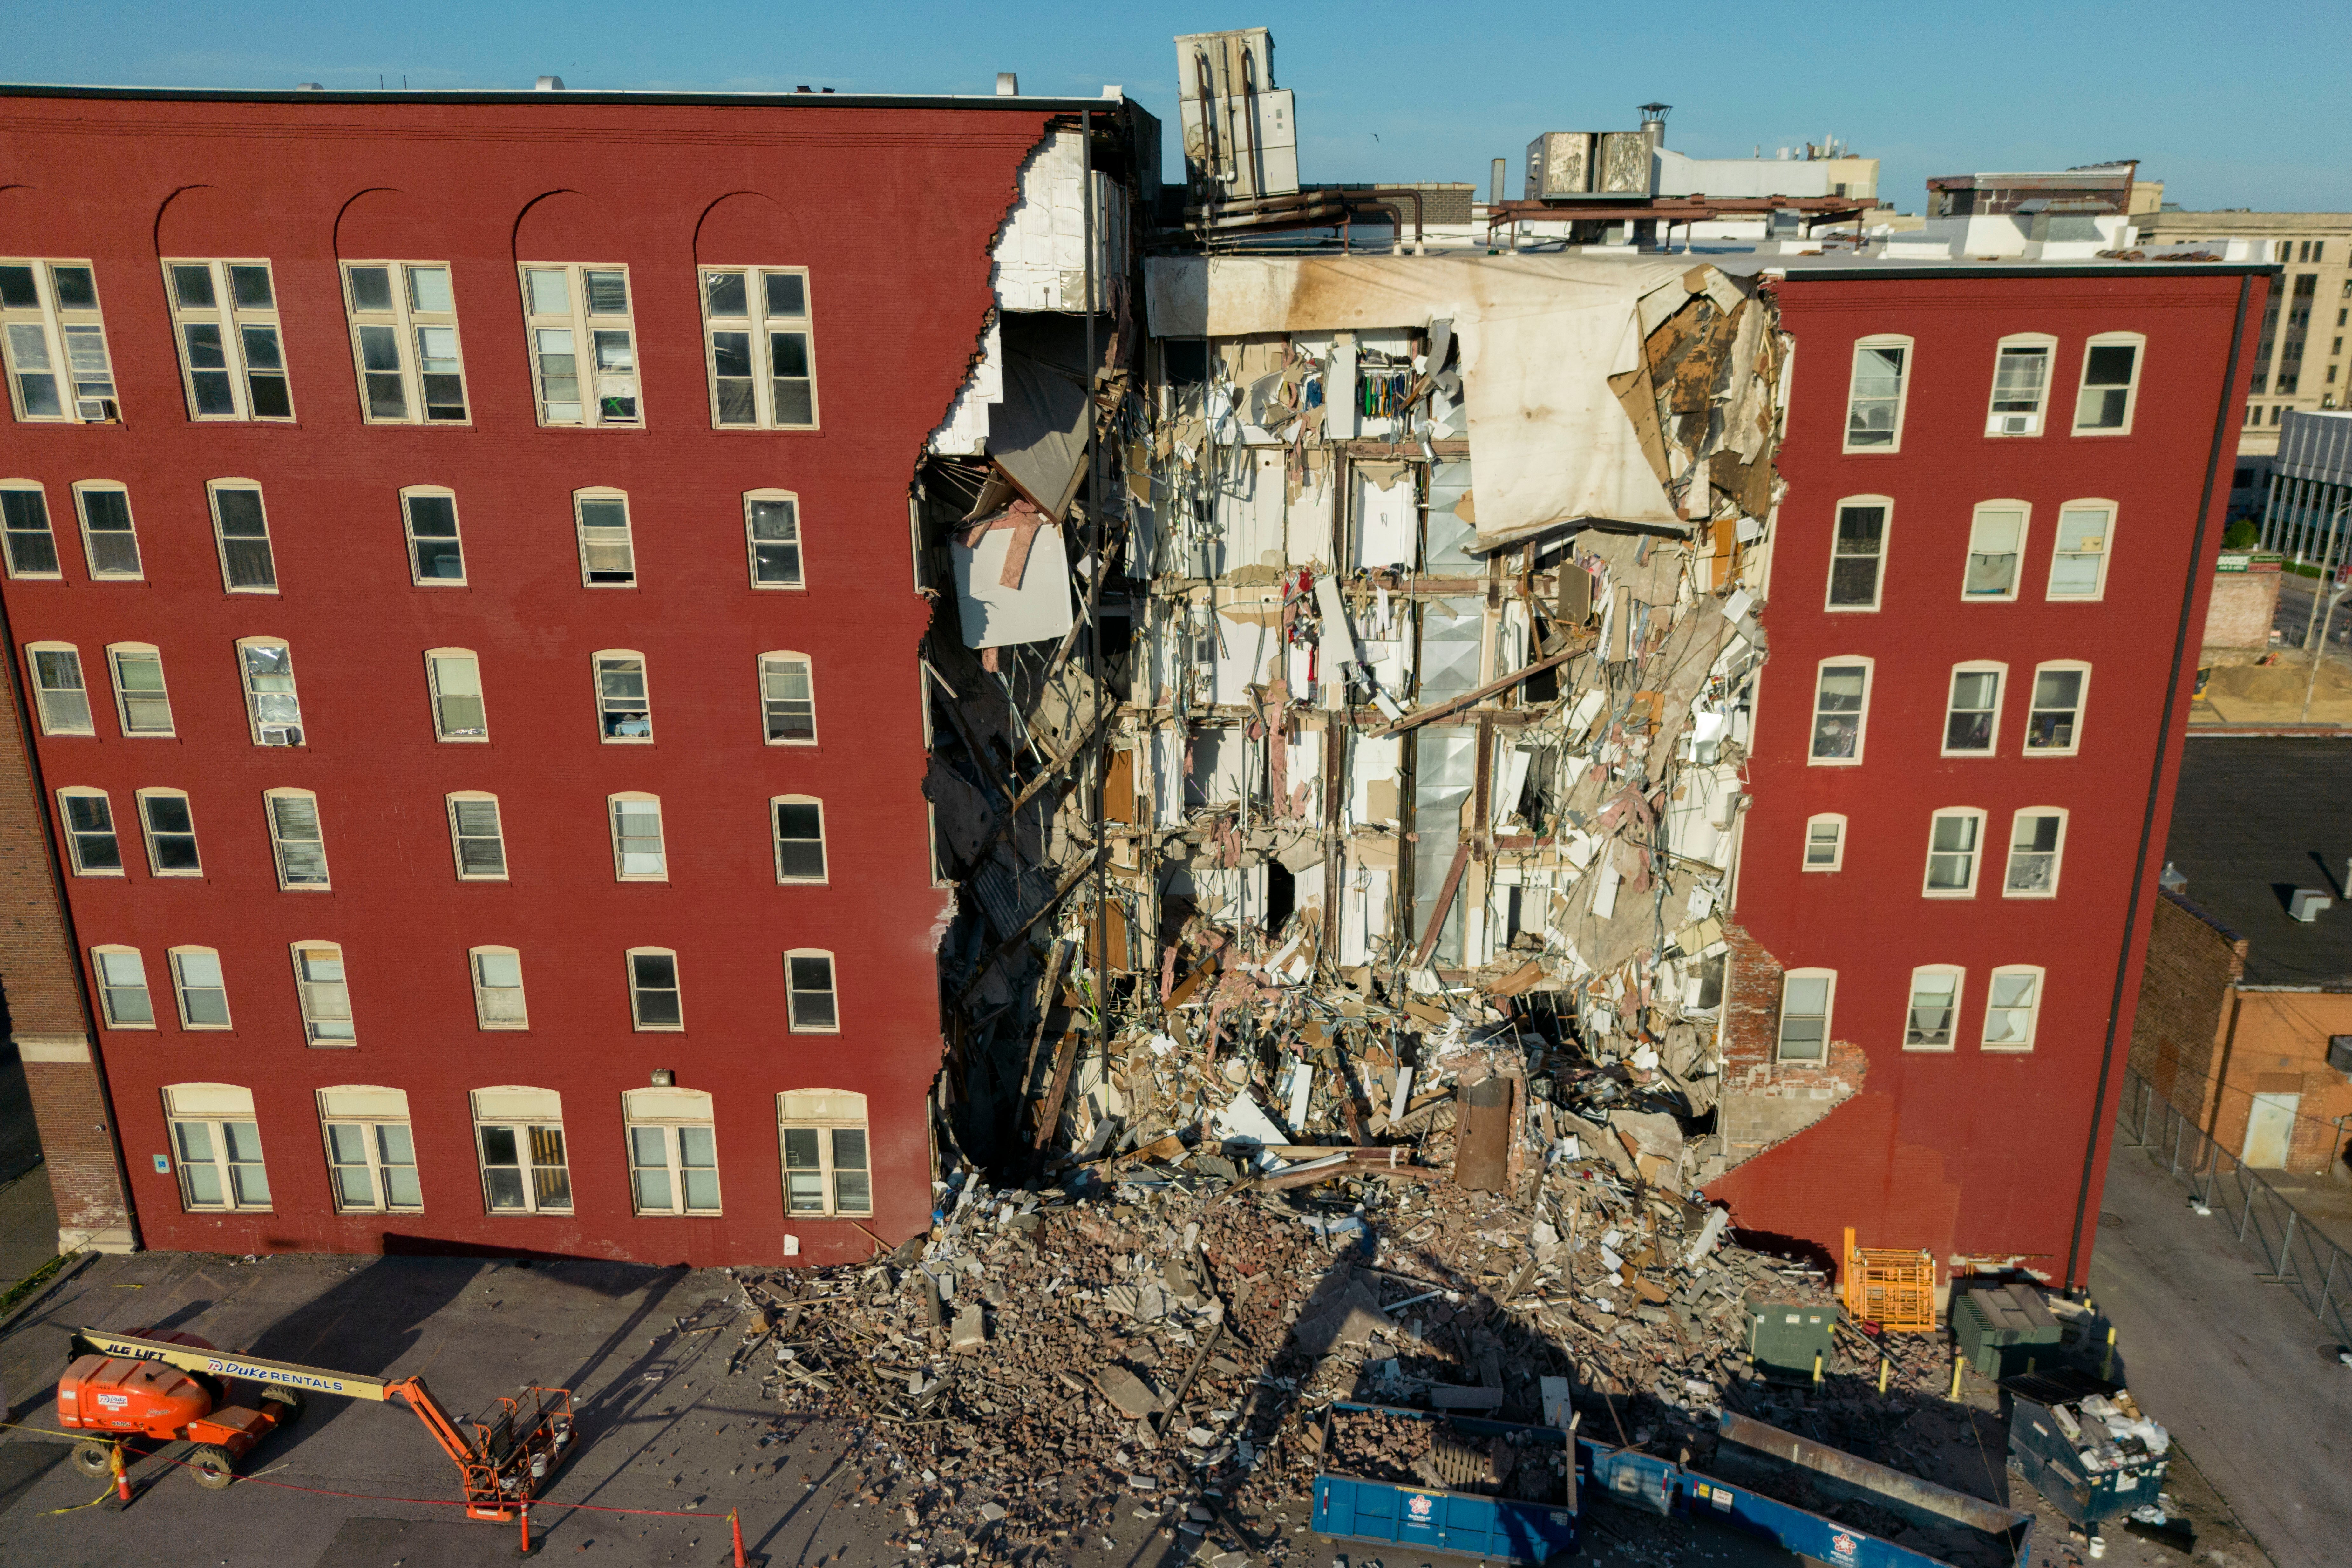 Three people are unaccounted for after a building collapsed in Davenport, Iowa, on Sunday evening. Two of them are believed to be trapped under debris